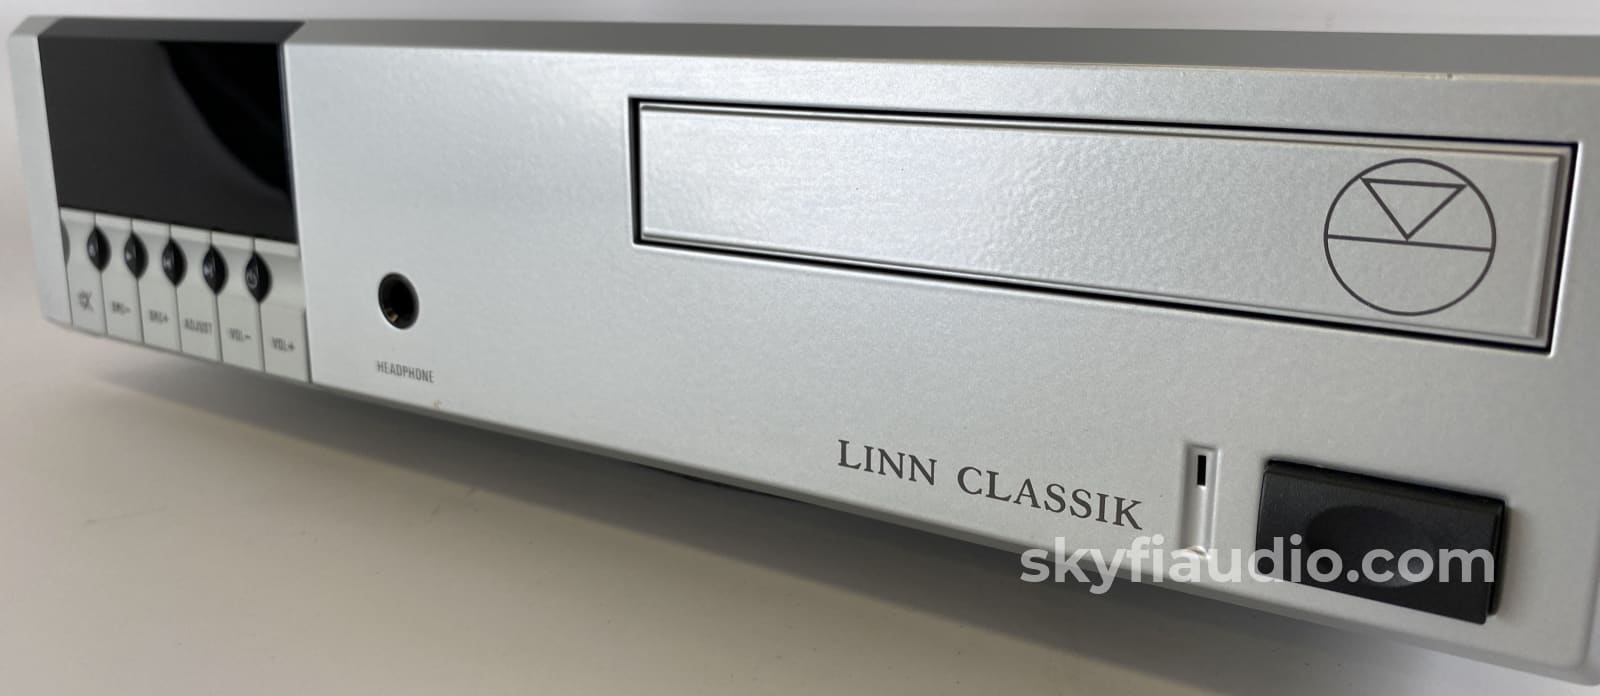 Linn Classik Receiver With Integrated Cd Player And Remote Amplifier